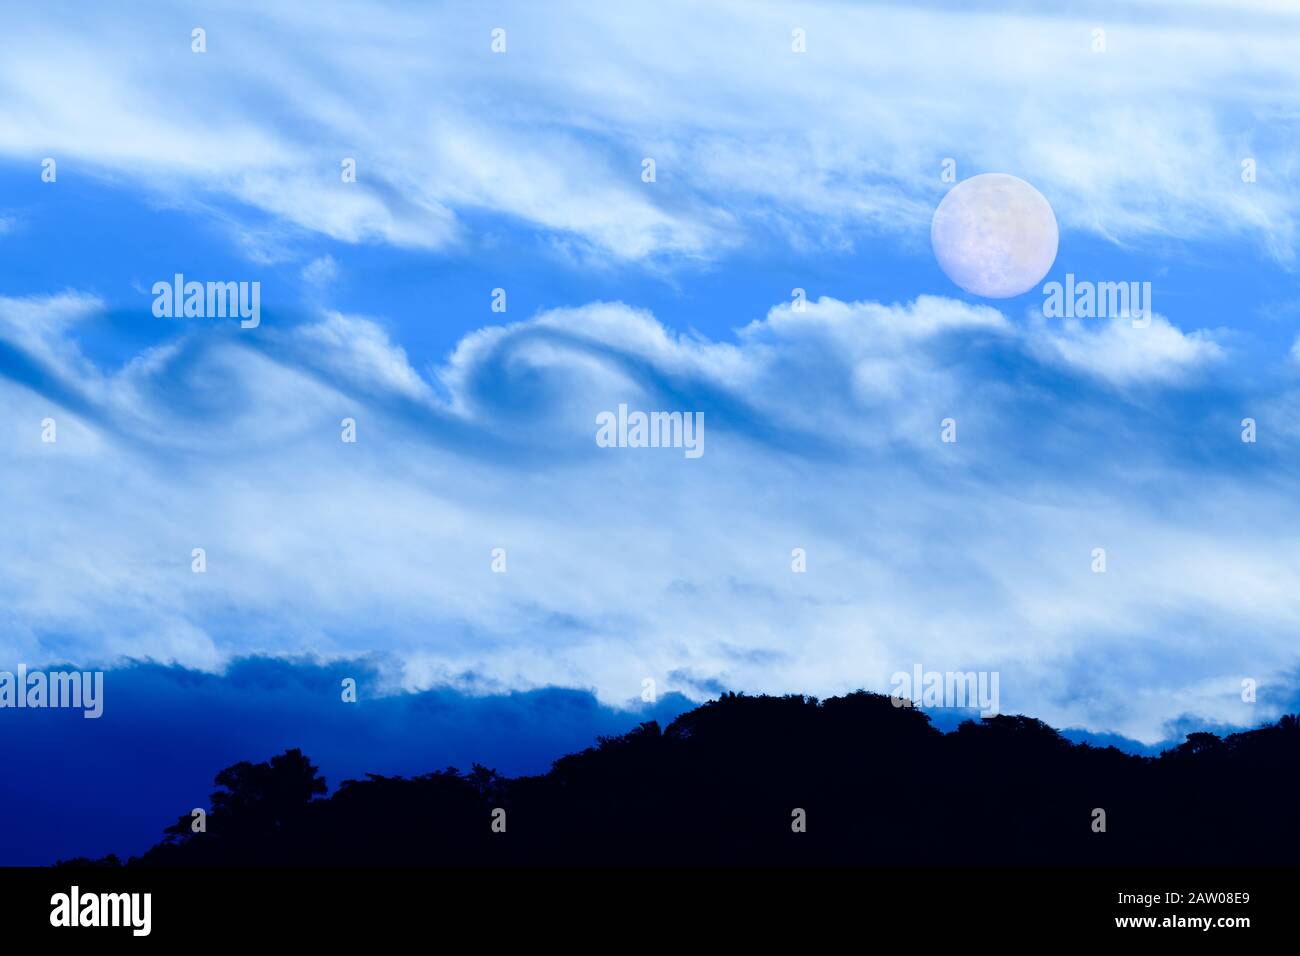 Full Moon is Rising in the Night Sky Over a Surreal Fantasy Like Cloudscape Stock Photo